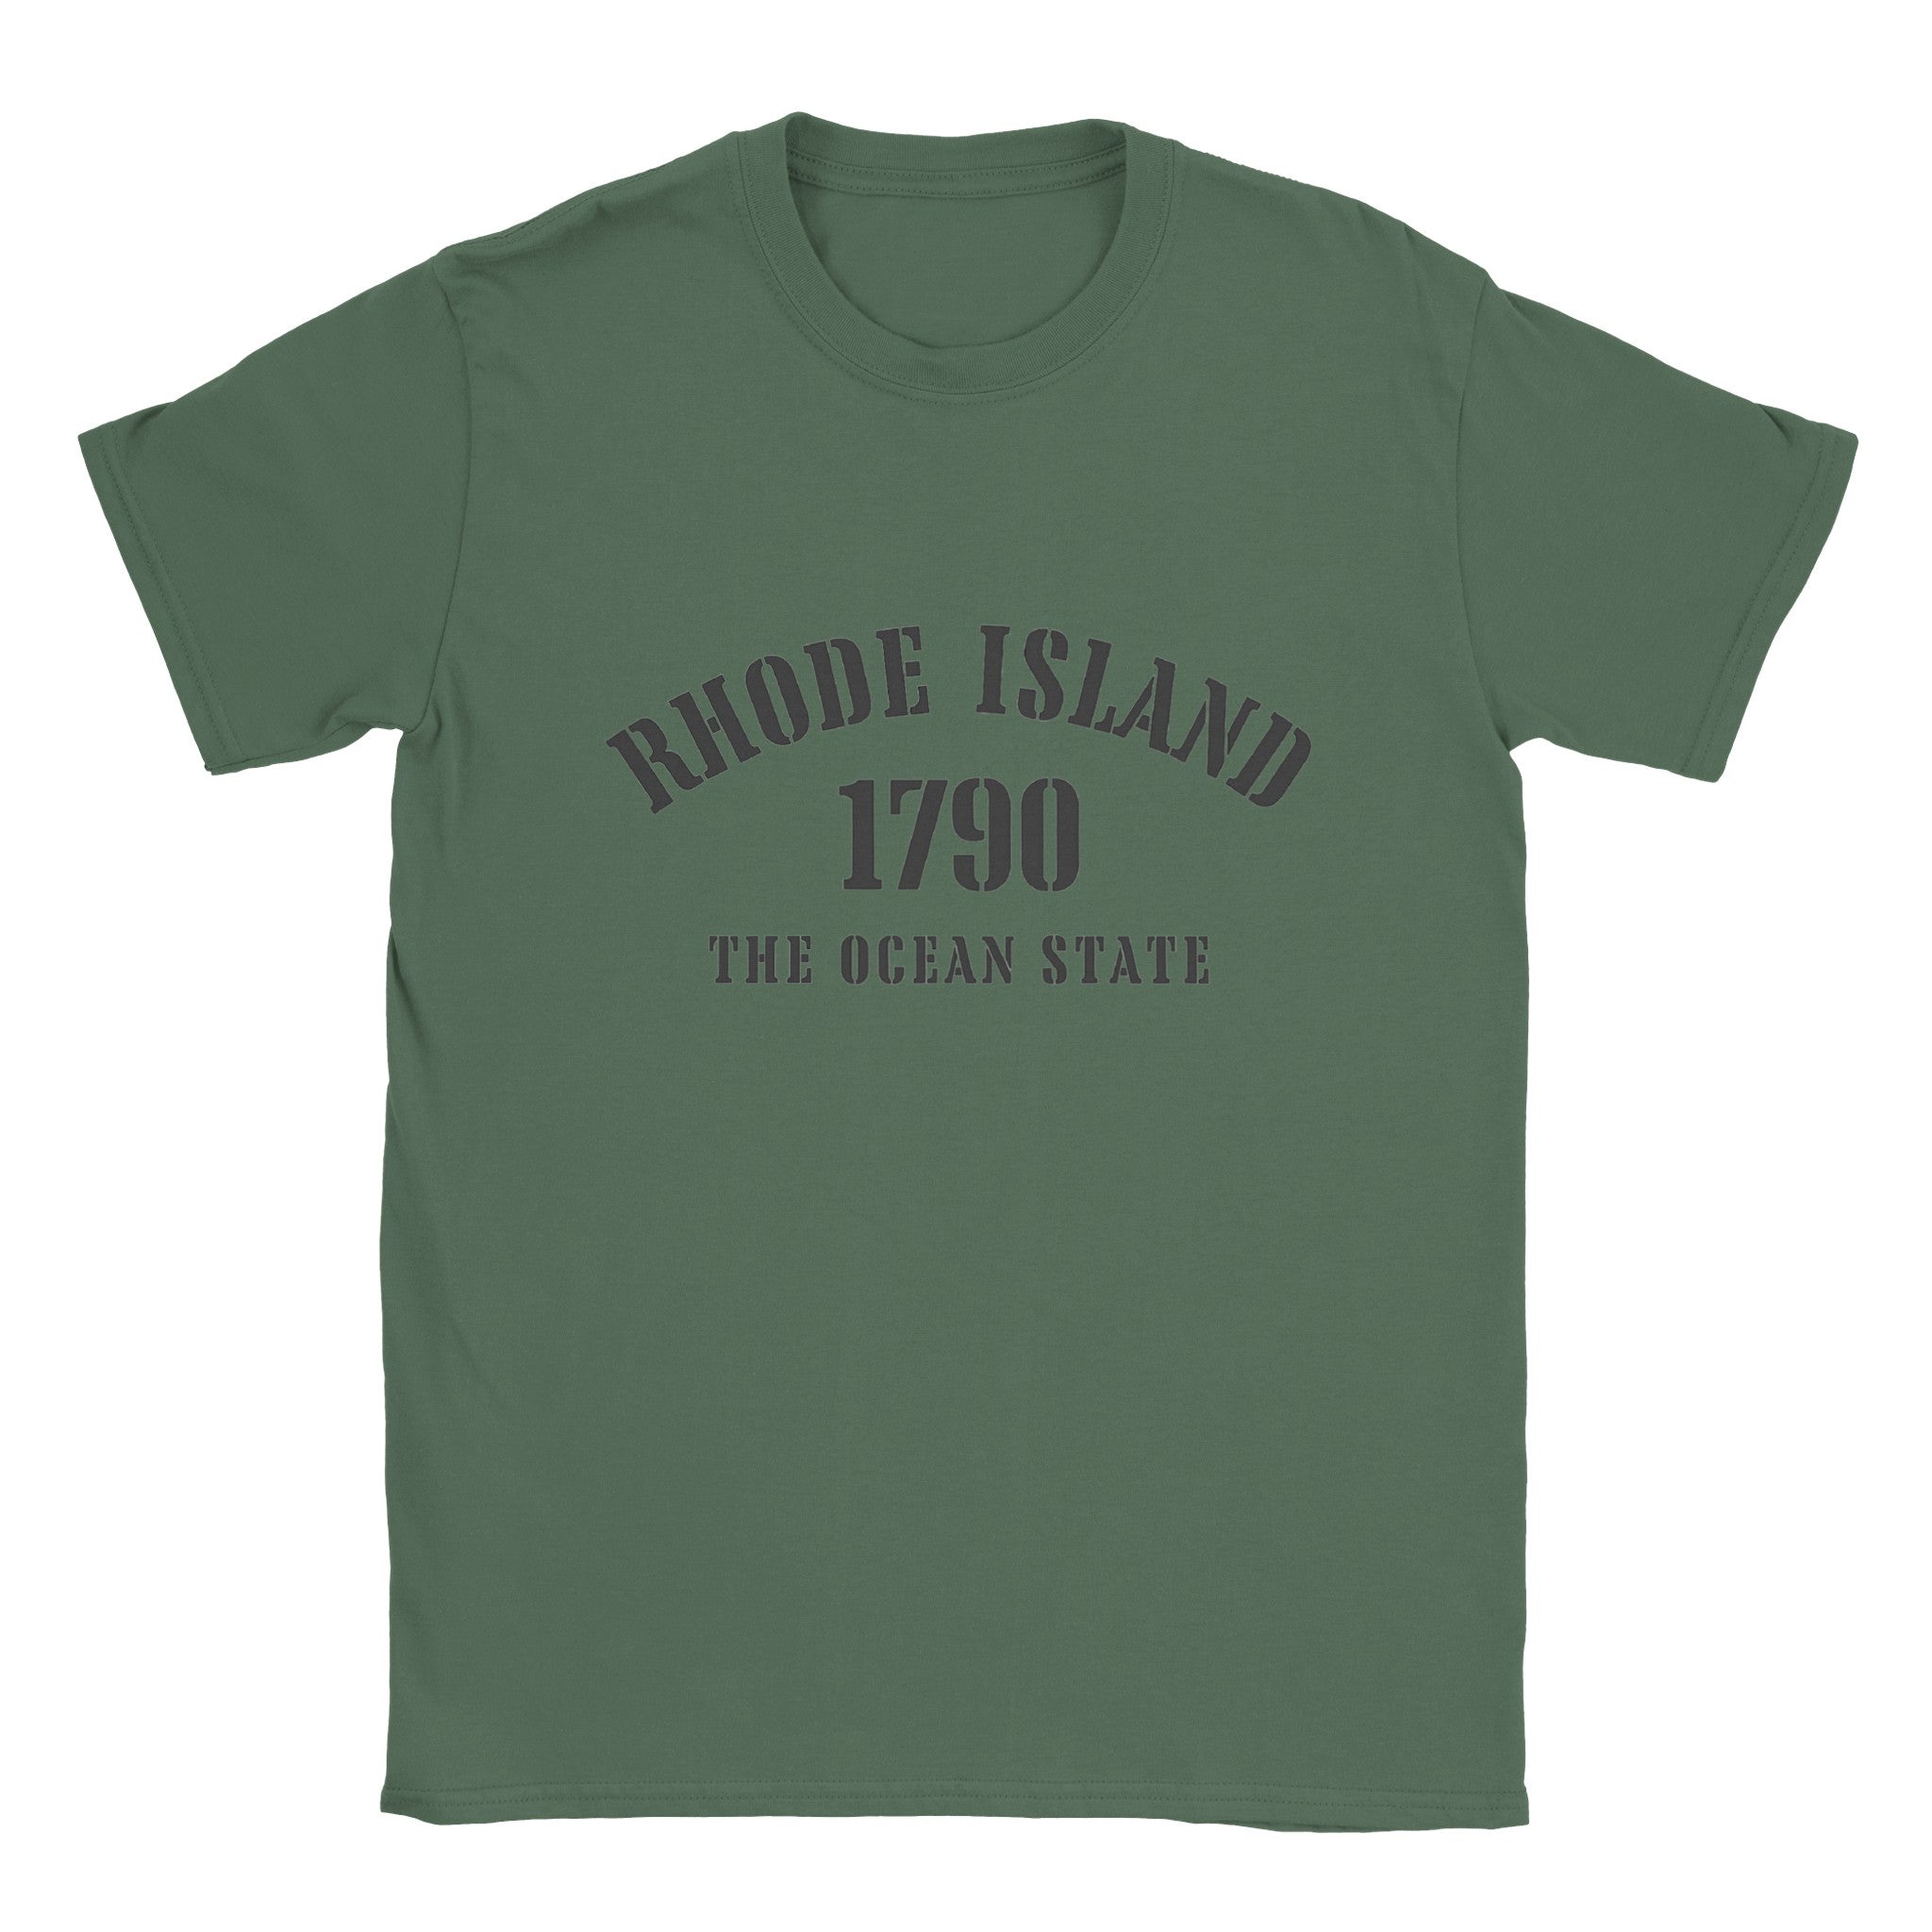 Rhode Island- Classic Unisex Crewneck States T-shirt - Creations by Chris and Carlos